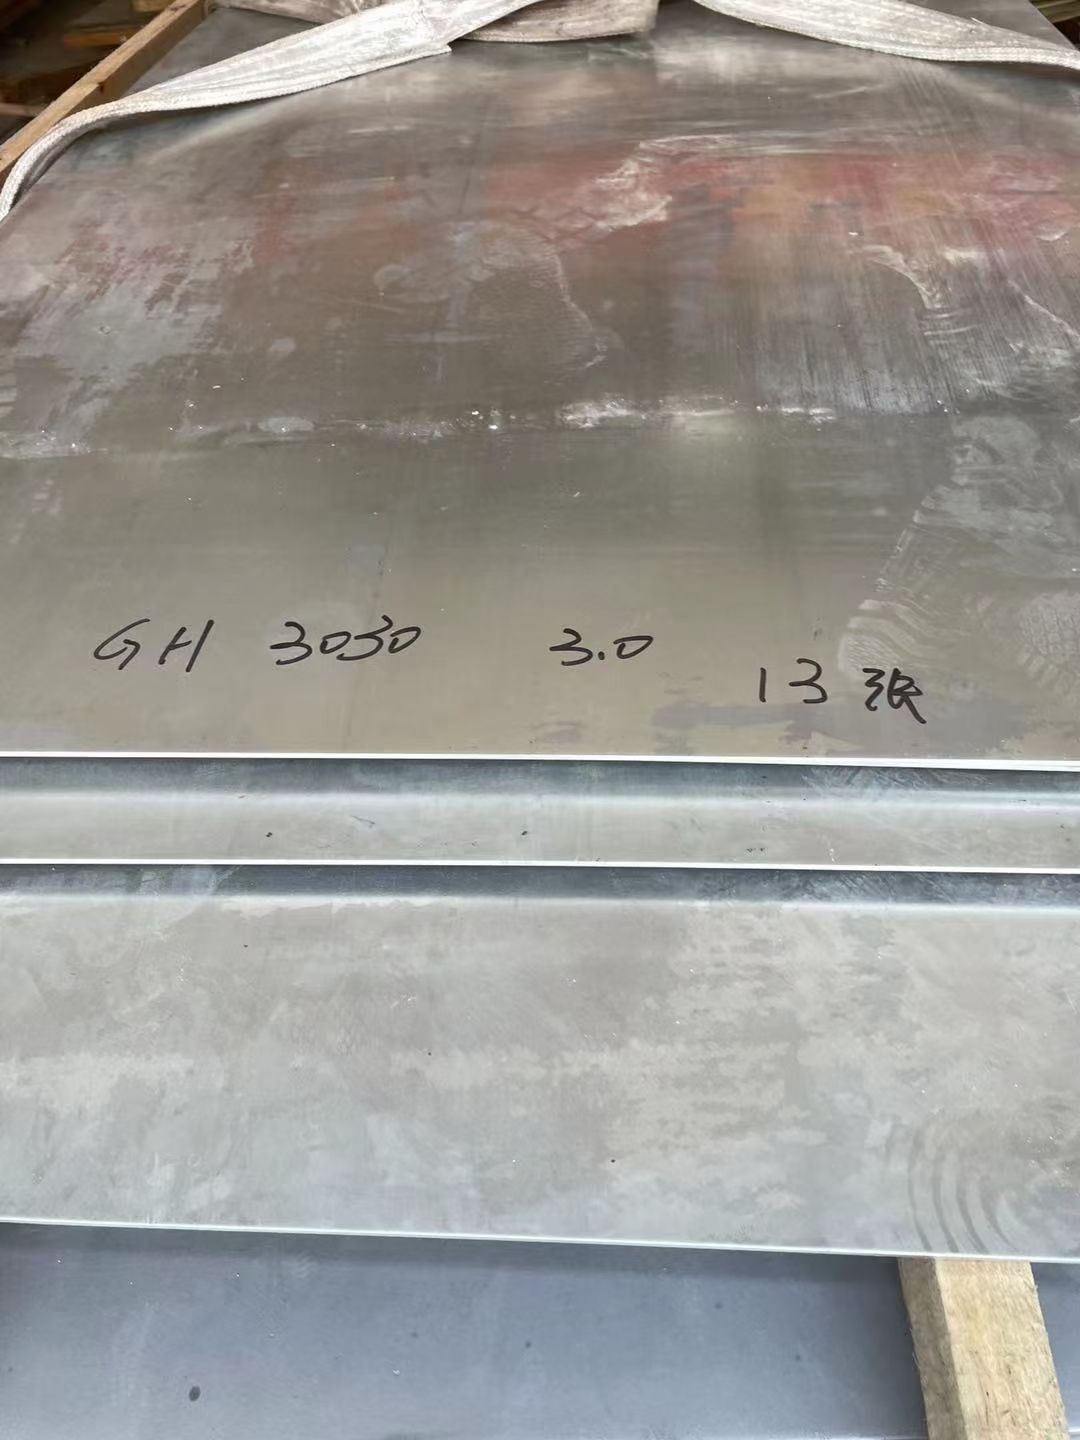 Invar36 Gh3030 Alloy31 Gh3128 Incoloy 901 Monel400 Inconel X750 High Temperature Nickel Alloy Plate/Sheet.